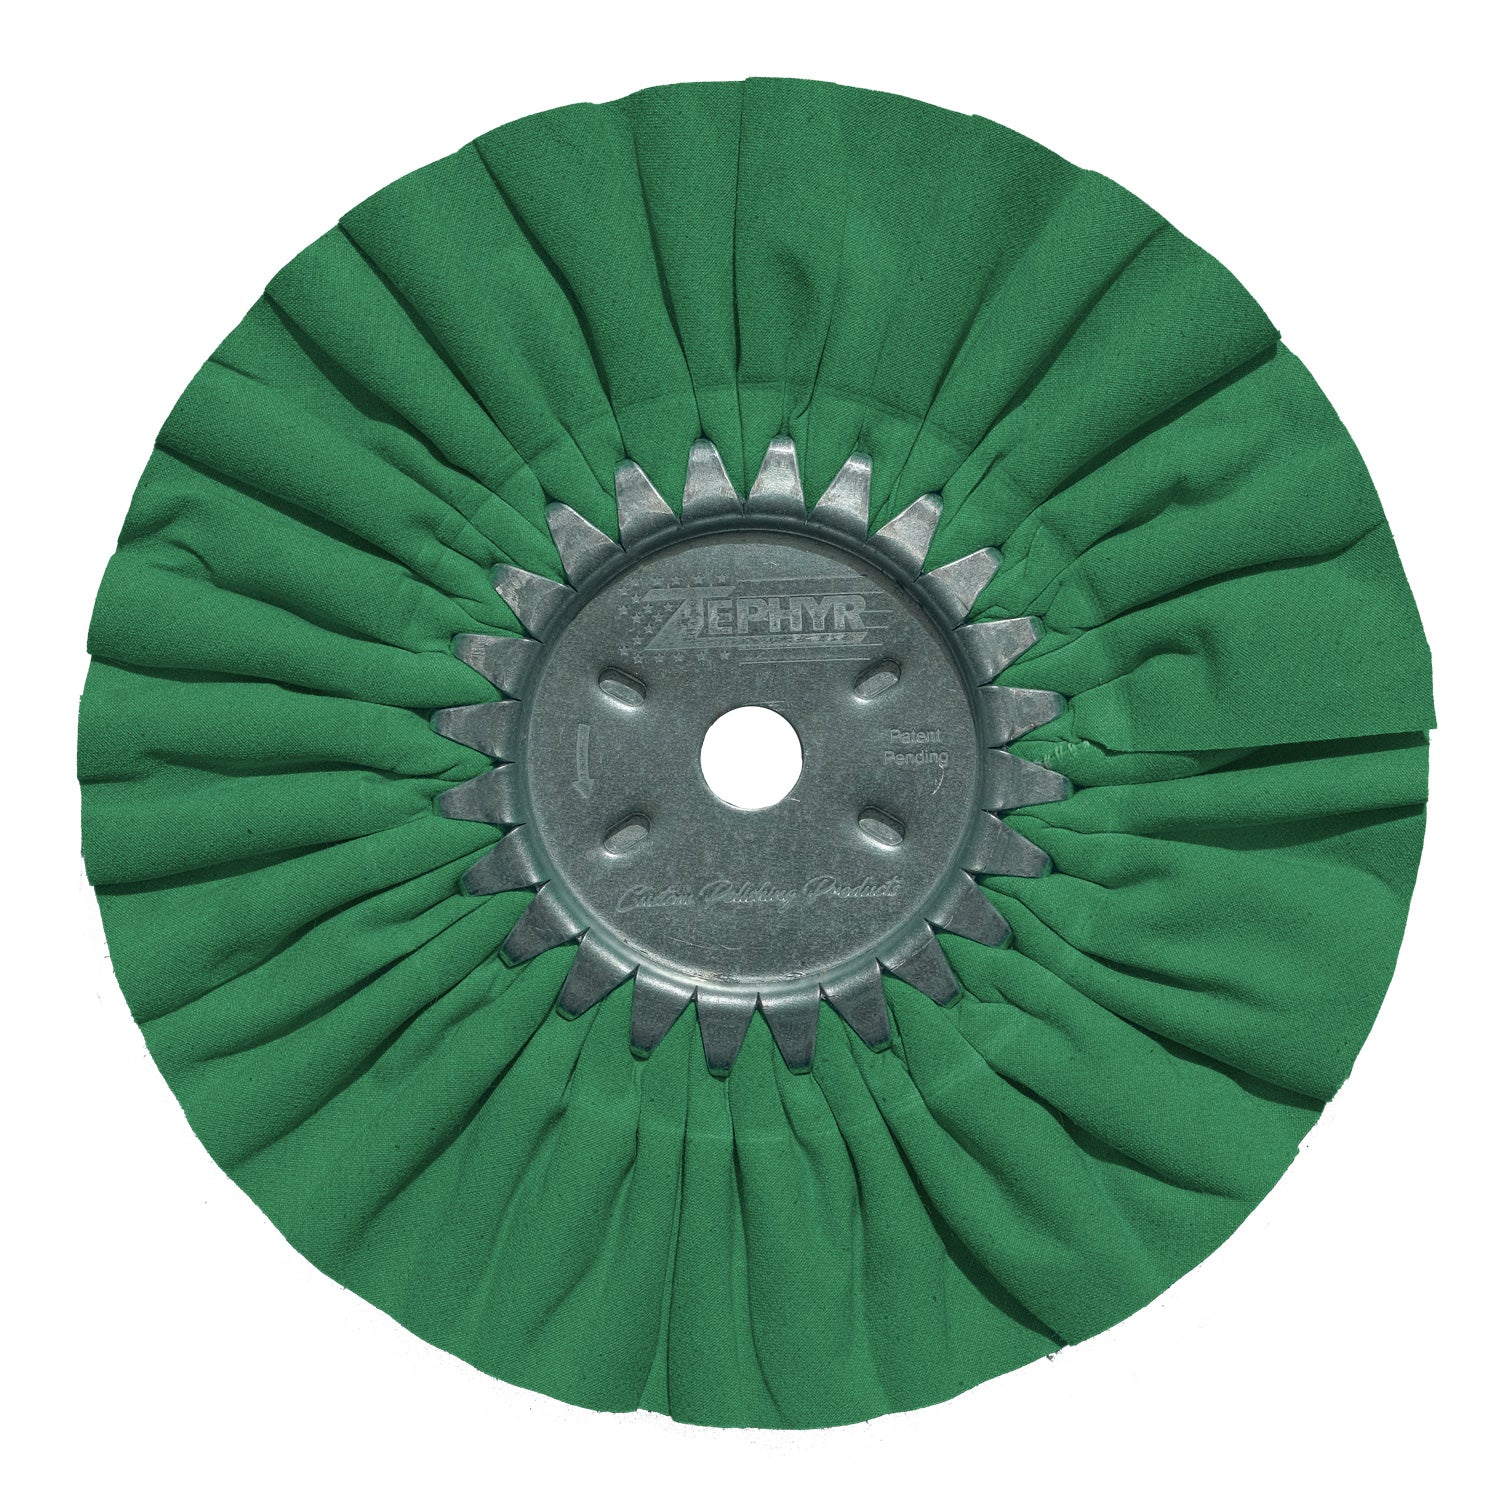 Airway Buffing Wheels for Angle Grinder - Go Shine On